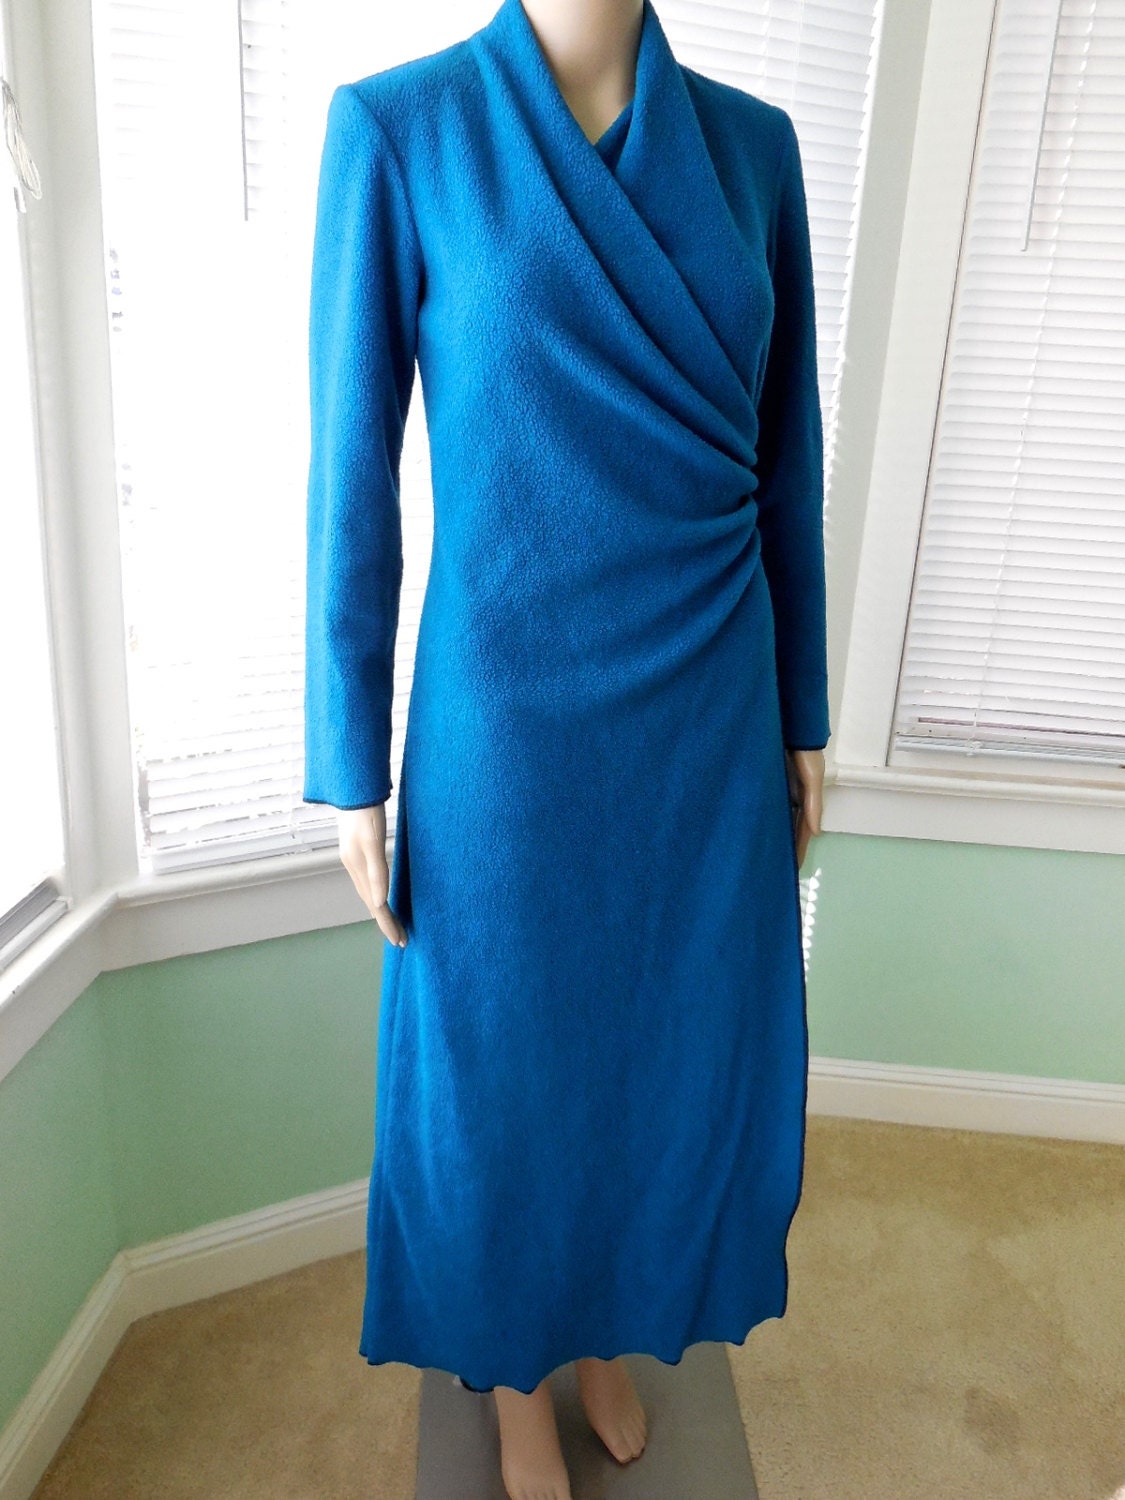 Vintage HOUSE ROBE/Womens Fitted Robe/Blue House Robe/Fleece